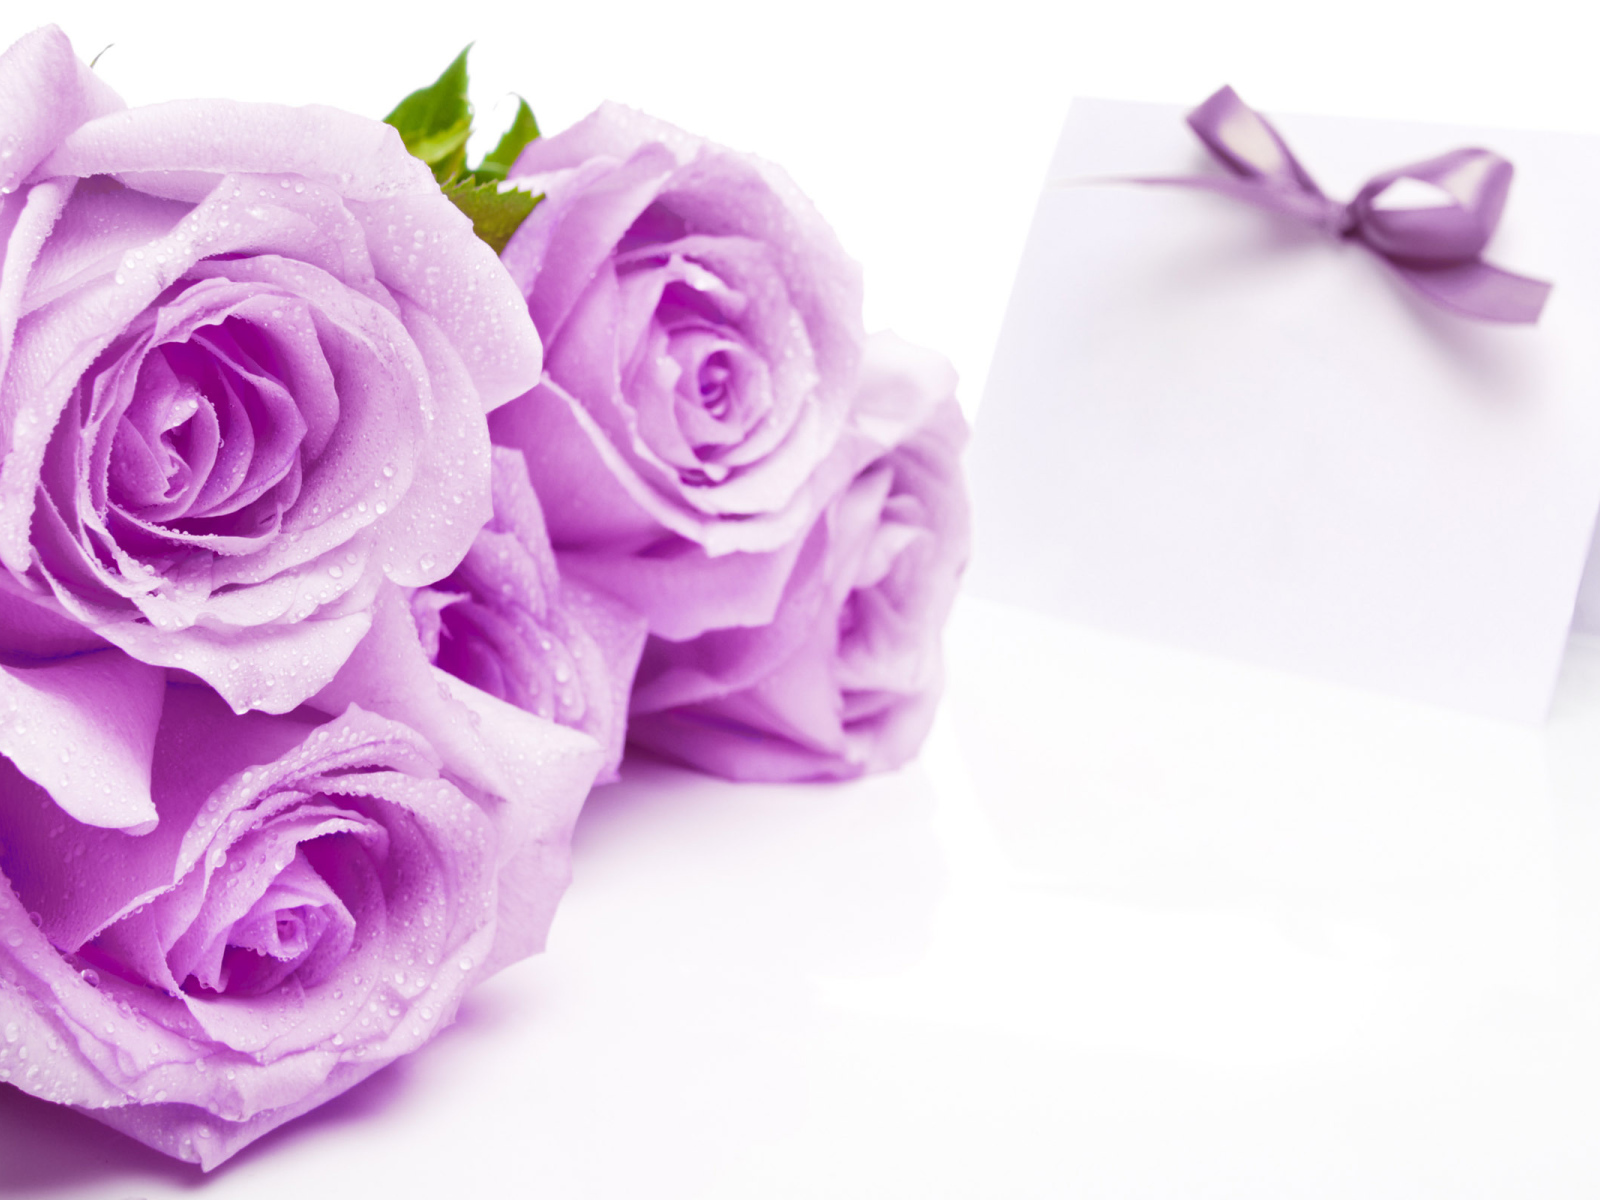 Bouquet of purple roses on March 8 for the beloved